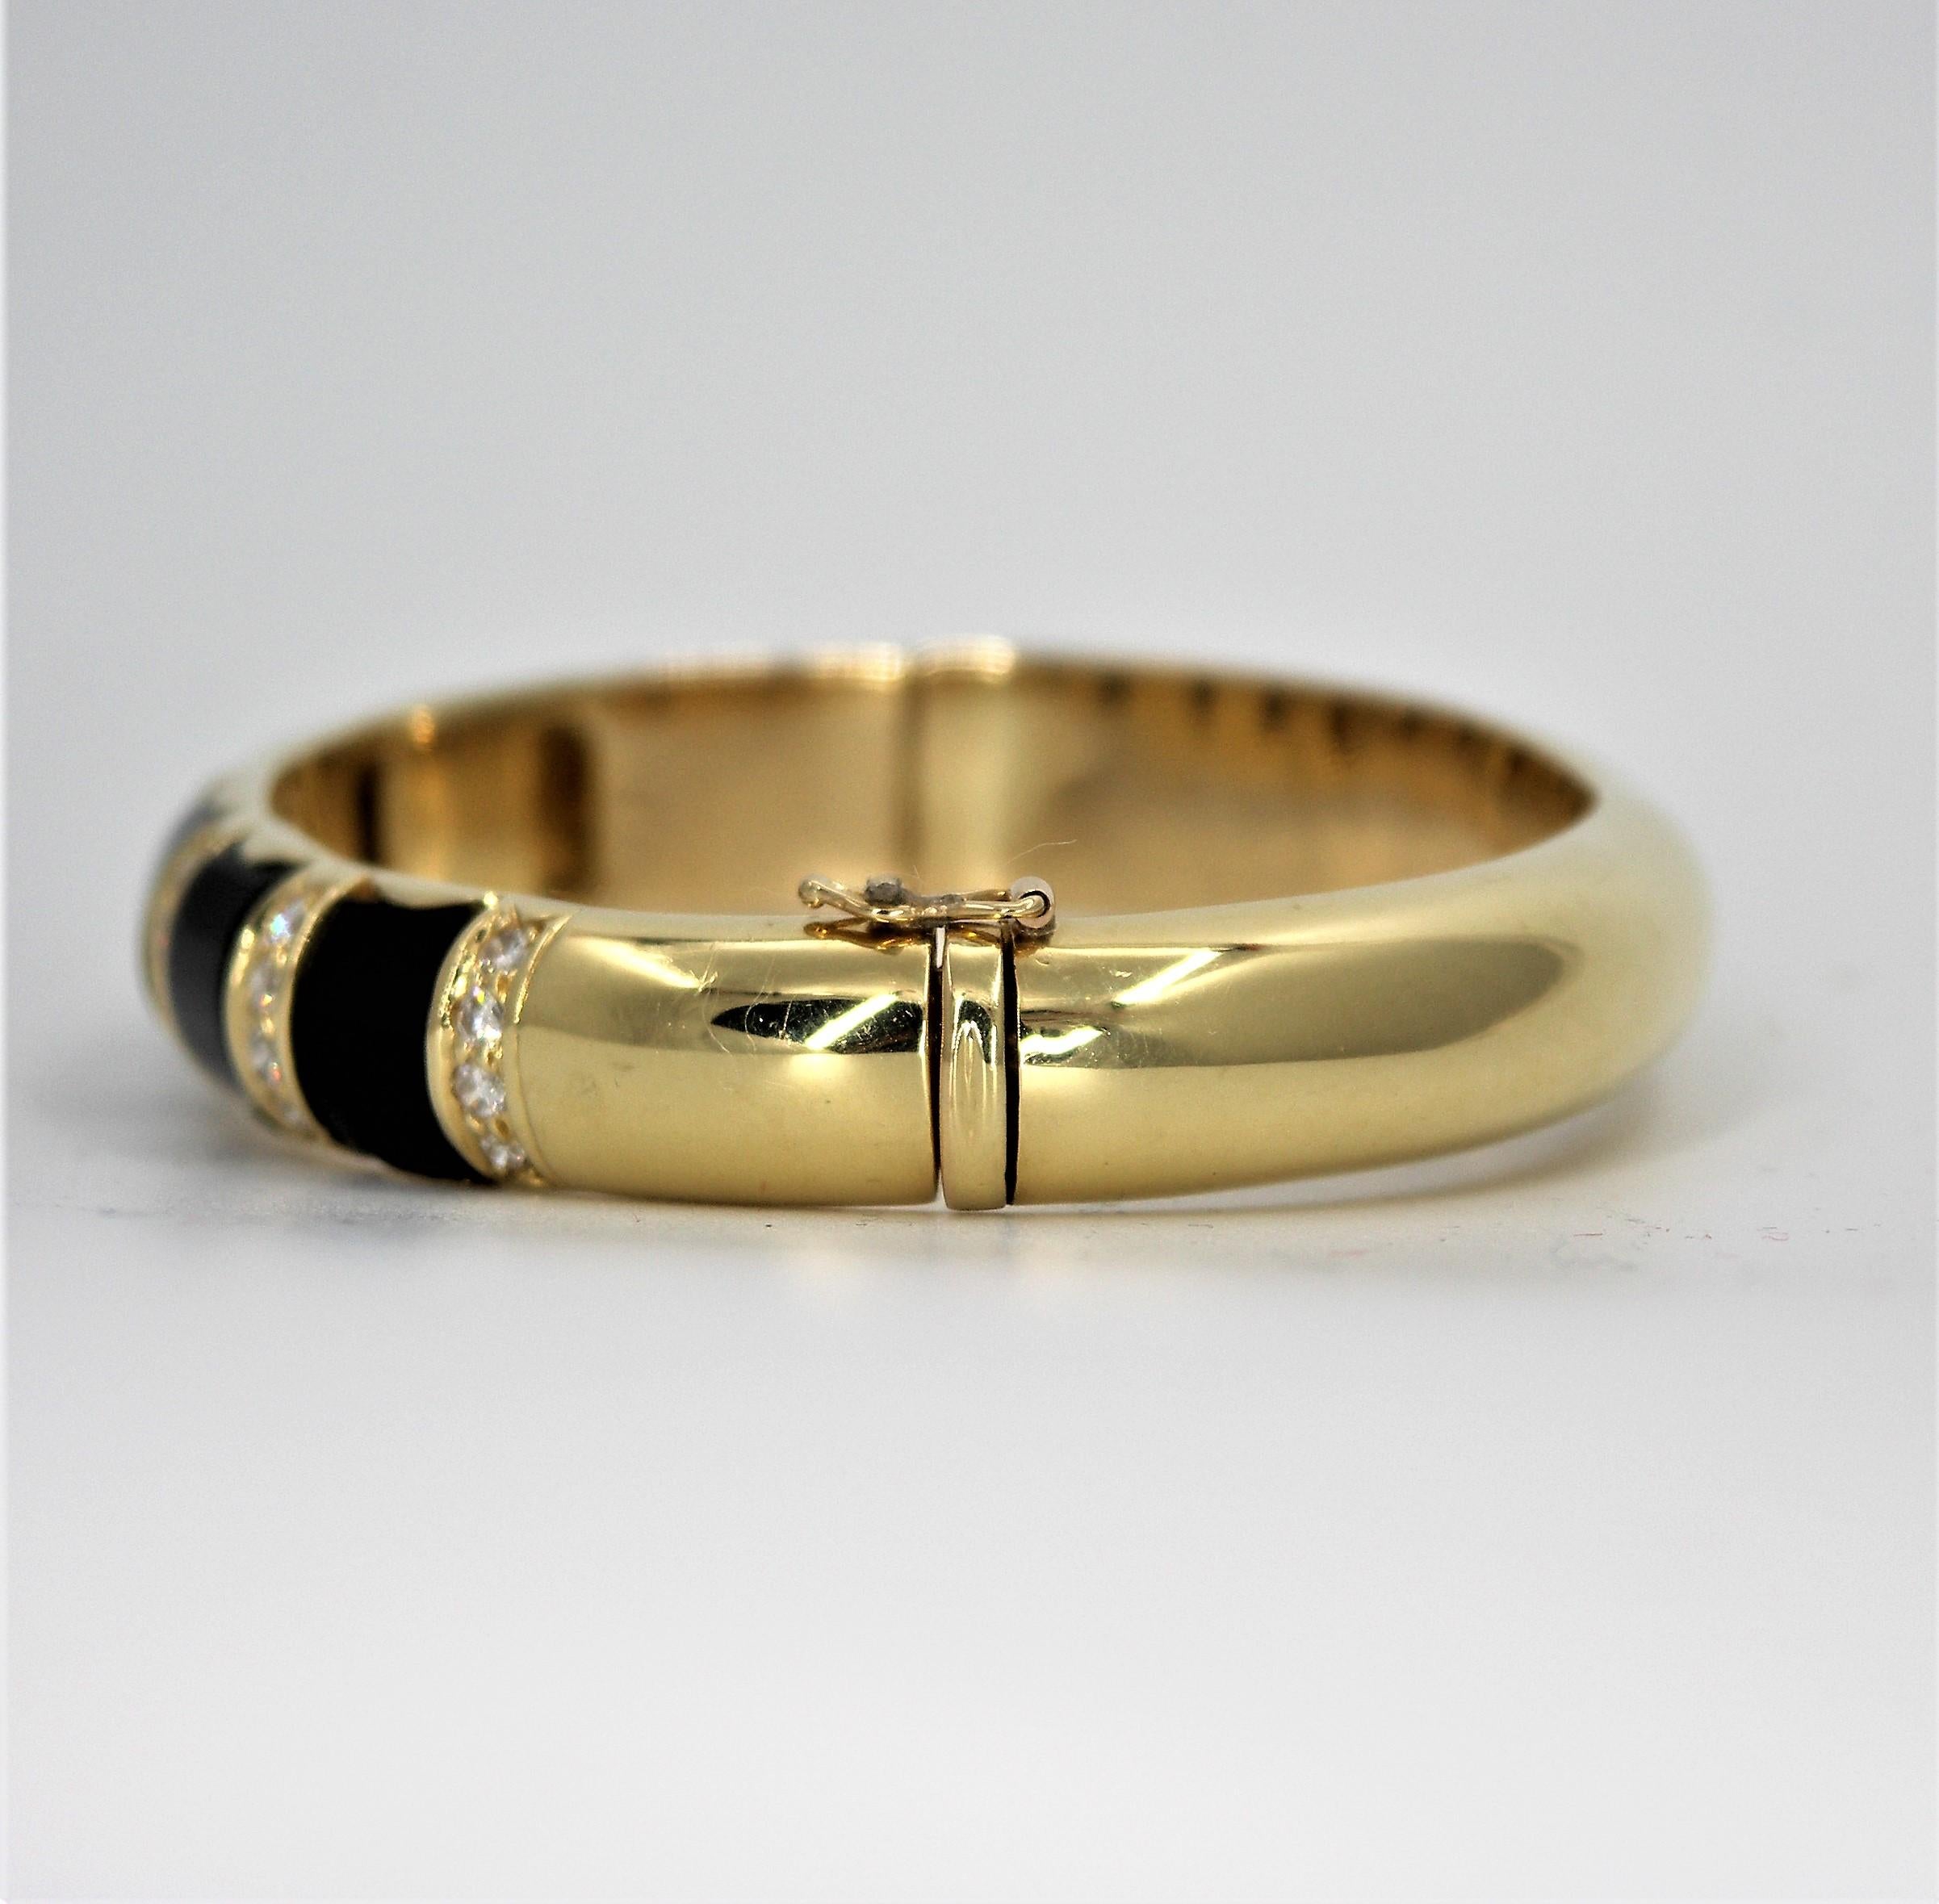 Made of 18K yellow gold, this oval shaped bangle is  set with five onyx sections and 
with 24 round brilliant cut diamonds weighing an approximate total of 1.20CT of overall 
G color and VS1 clarity. Hinged on one side and with a figure 8 safety on